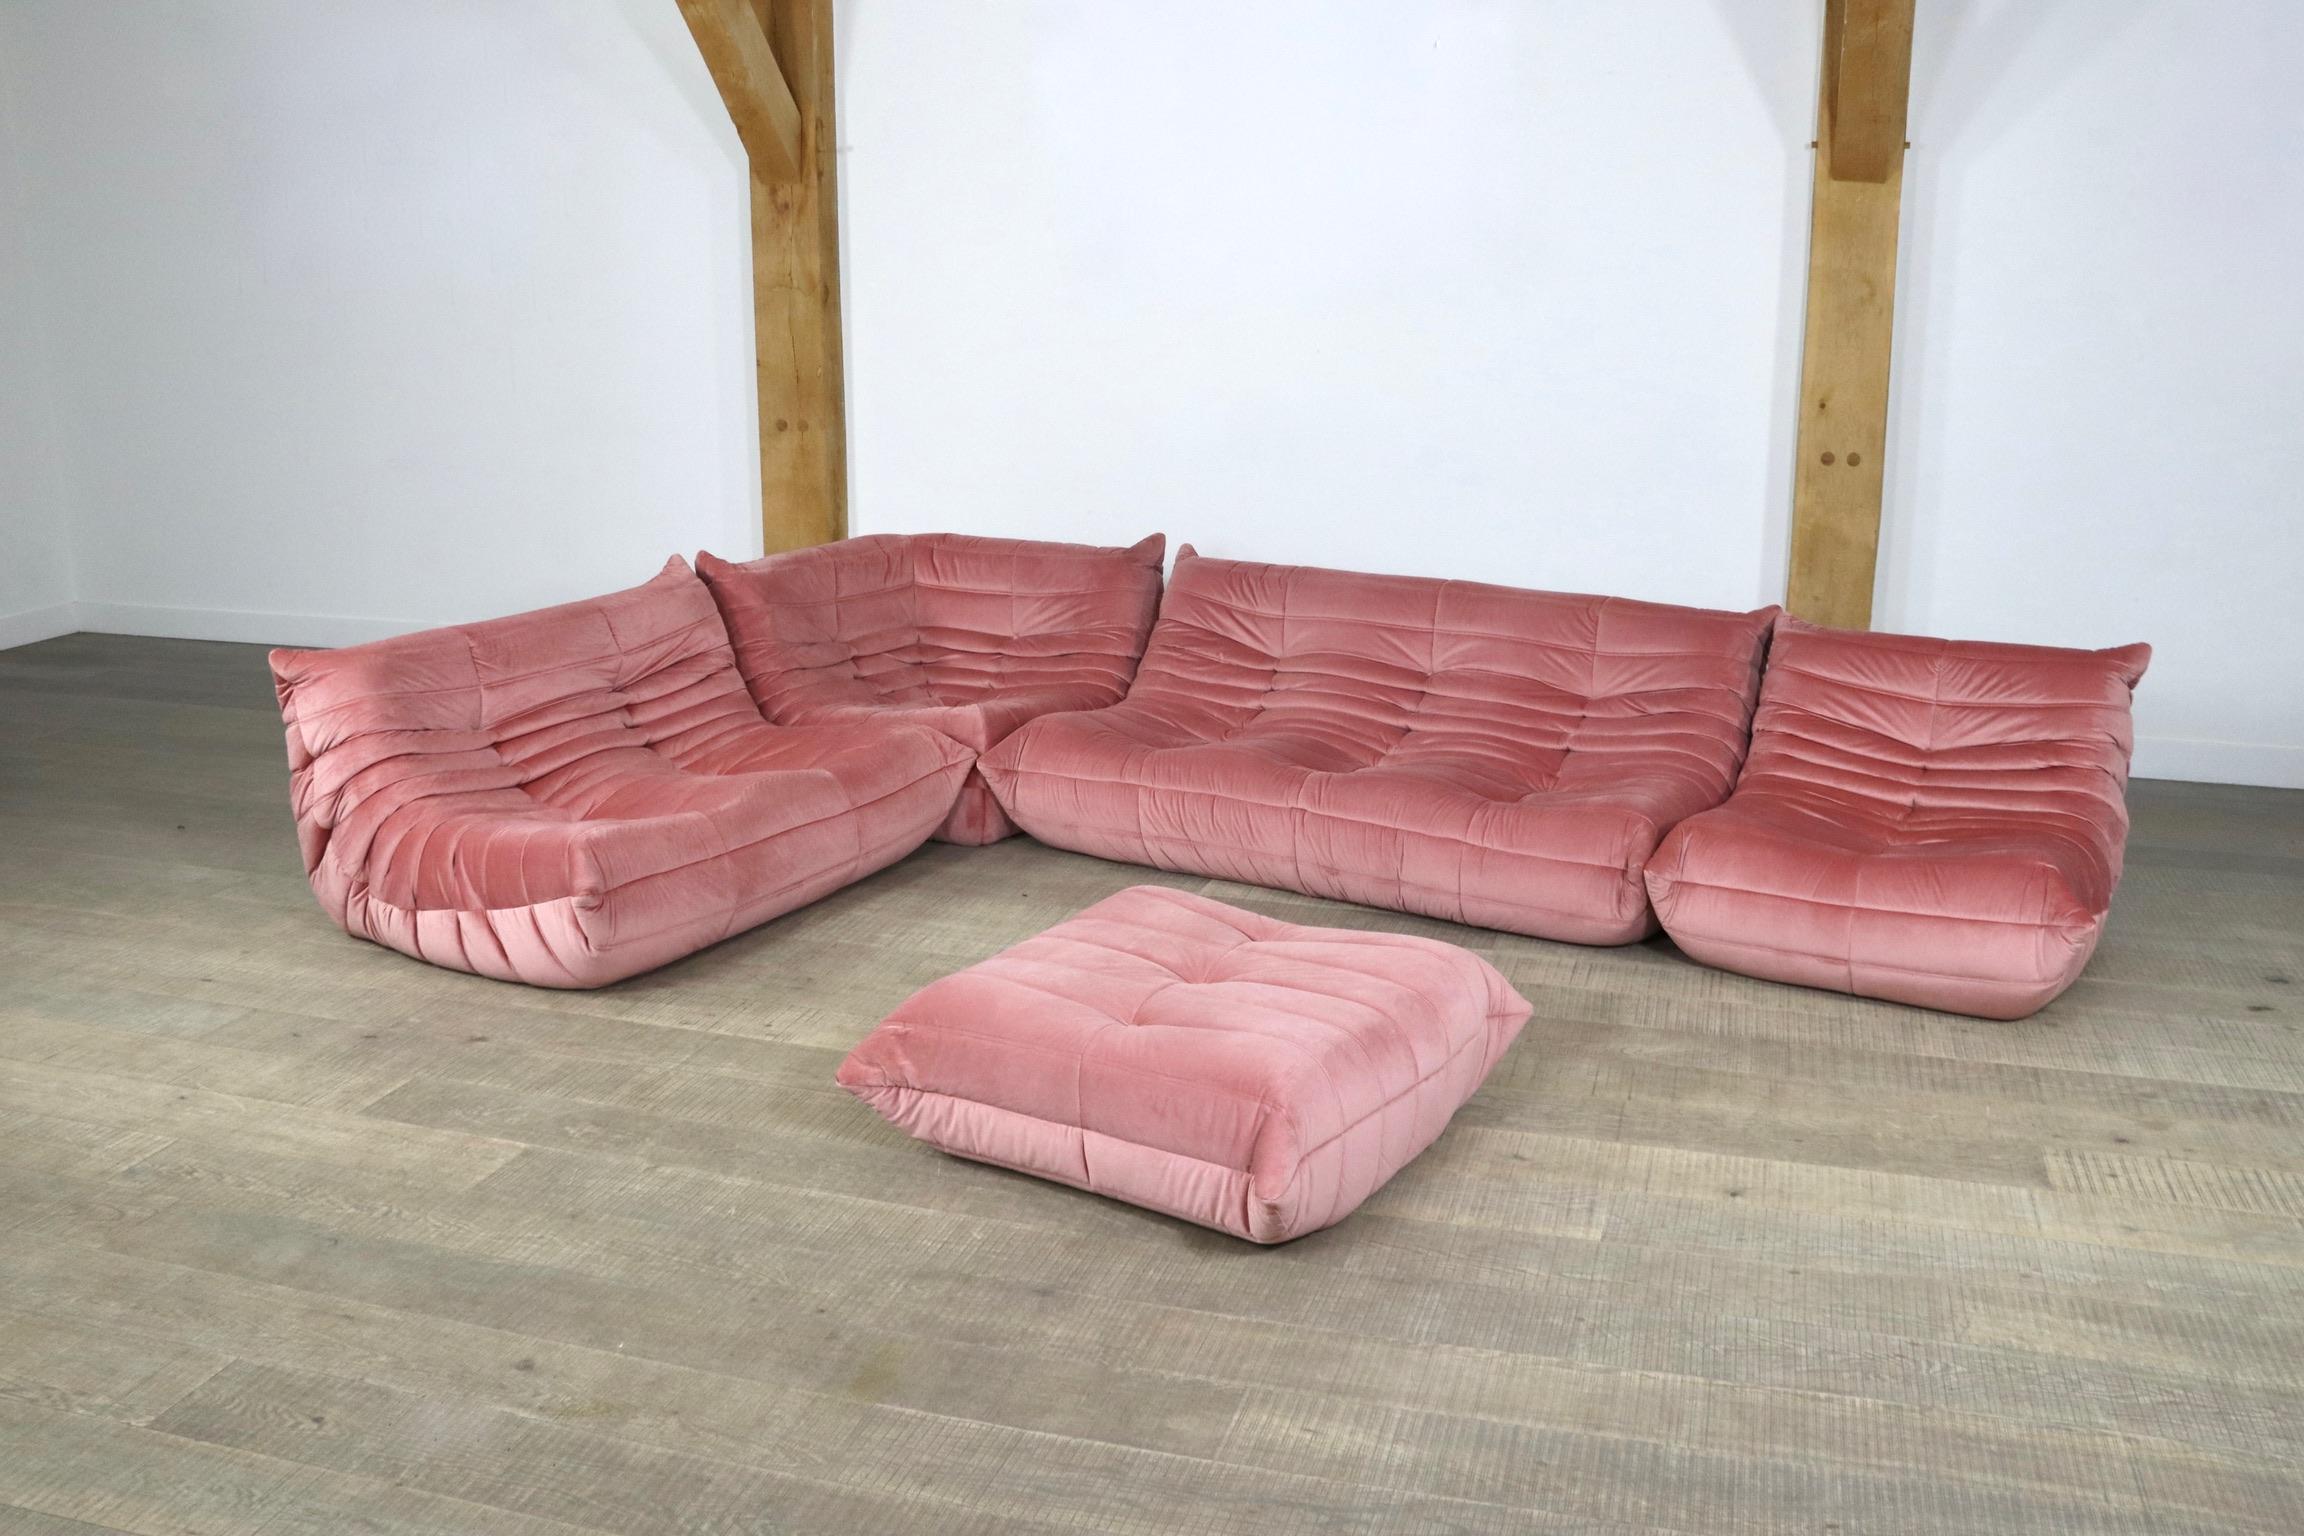 Beautiful pink velvet Togo seating group by Michel Ducaroy for Ligne Roset, 1970s. The entire seating group has the original Ligne Roset logo. The set consists of a 3-seater, a 2-seater, a corner, a lounge chair and ottoman. The beautiful fabric and